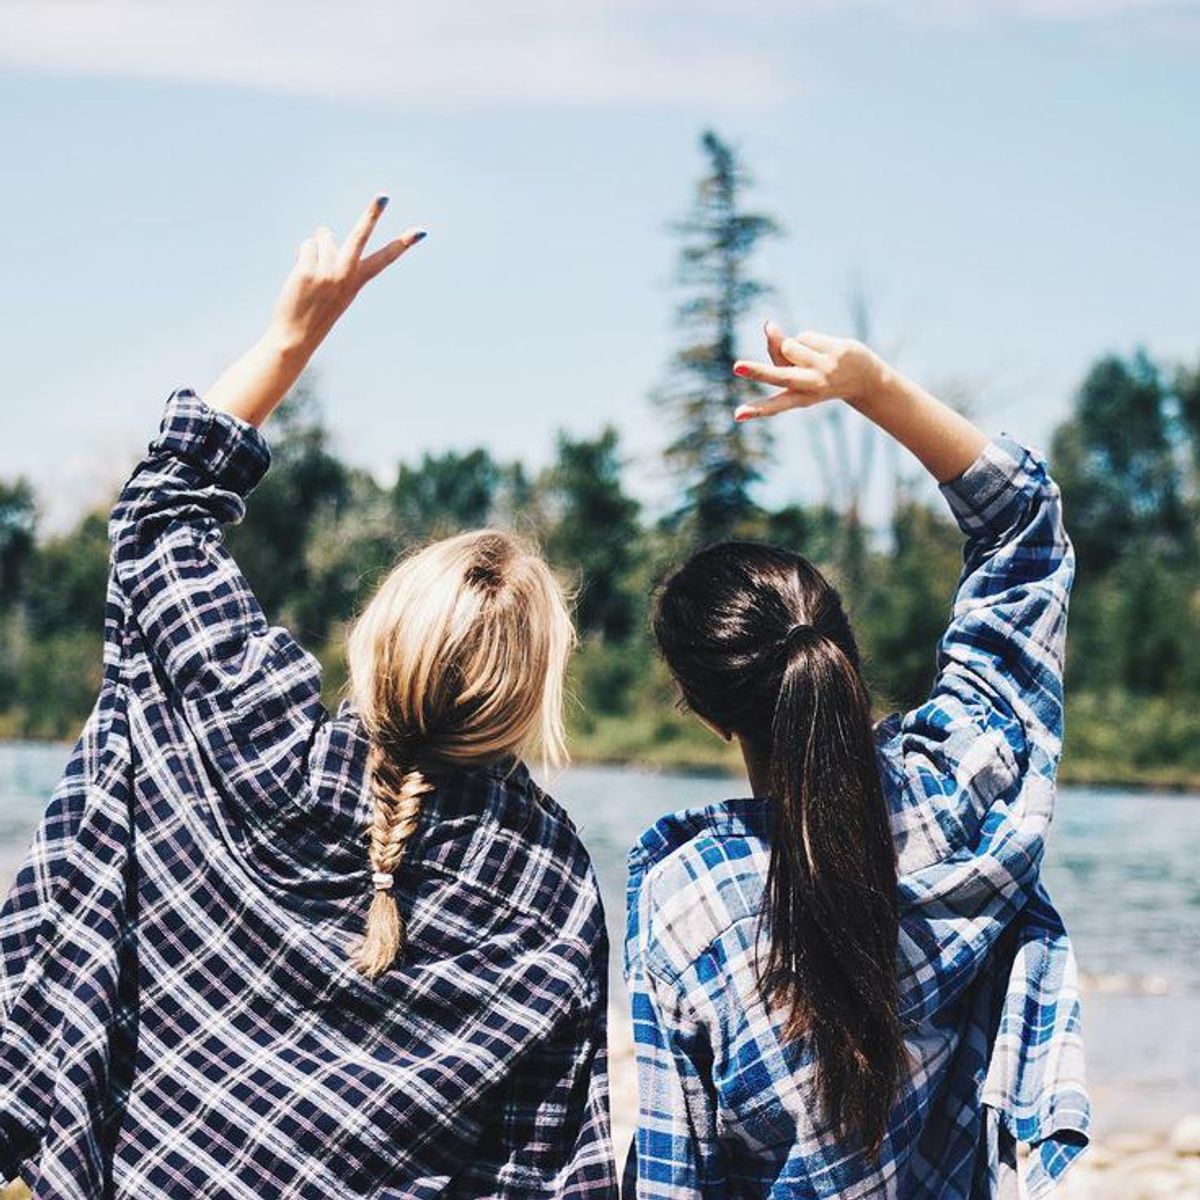 An Open Letter To The Friend Who Pushed Me Away